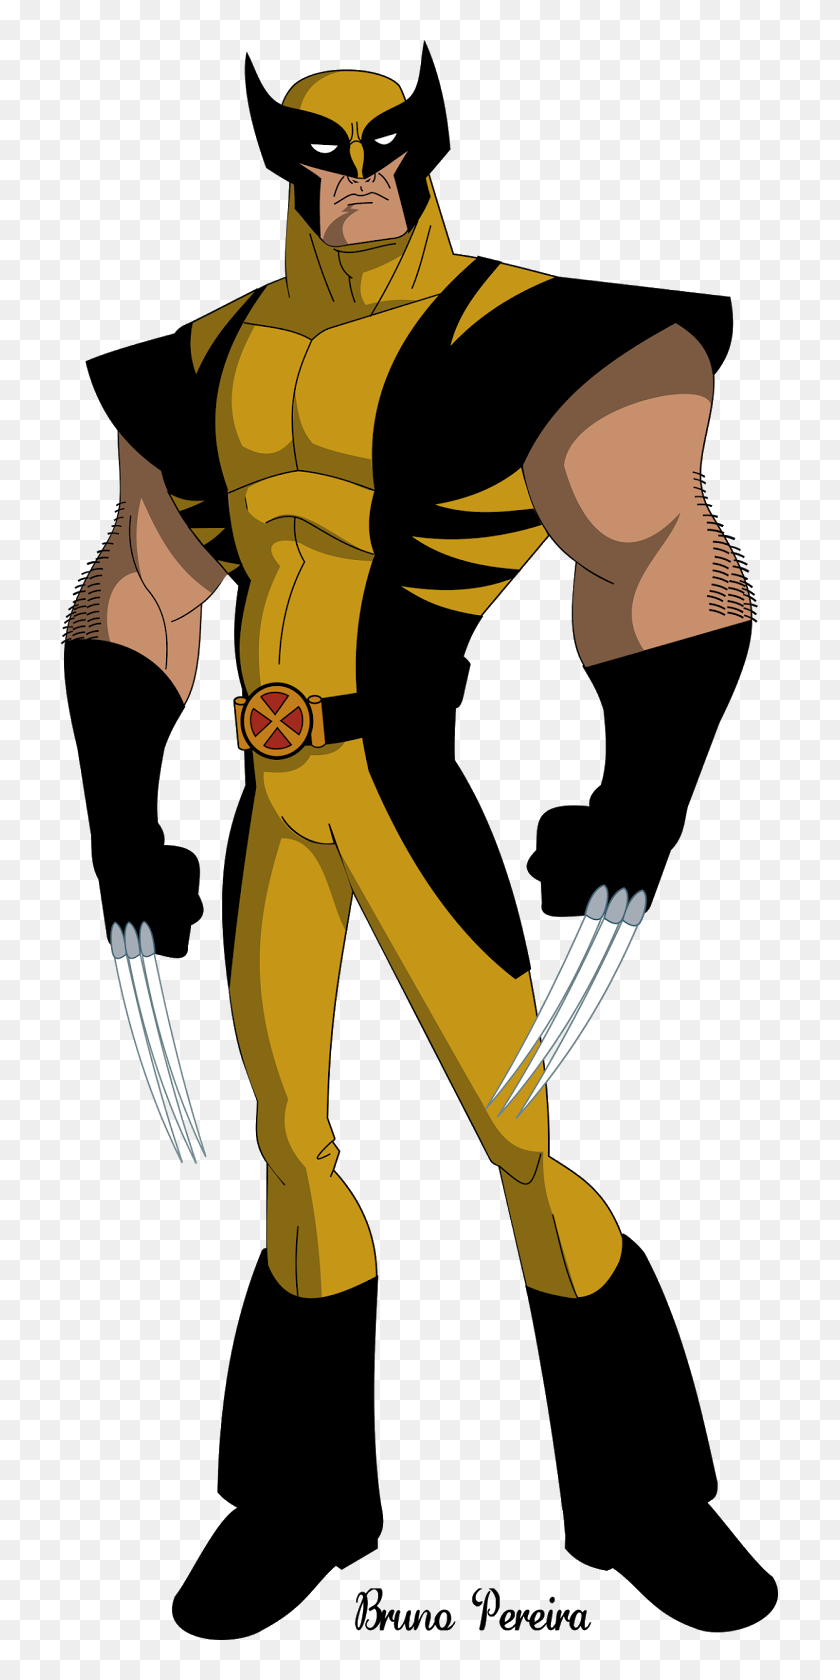 Clip Art Desenhos Wolverine Wolverine And The X Men Character Hd Png Download 717x1600 6905306 Pngfind - roblox x men